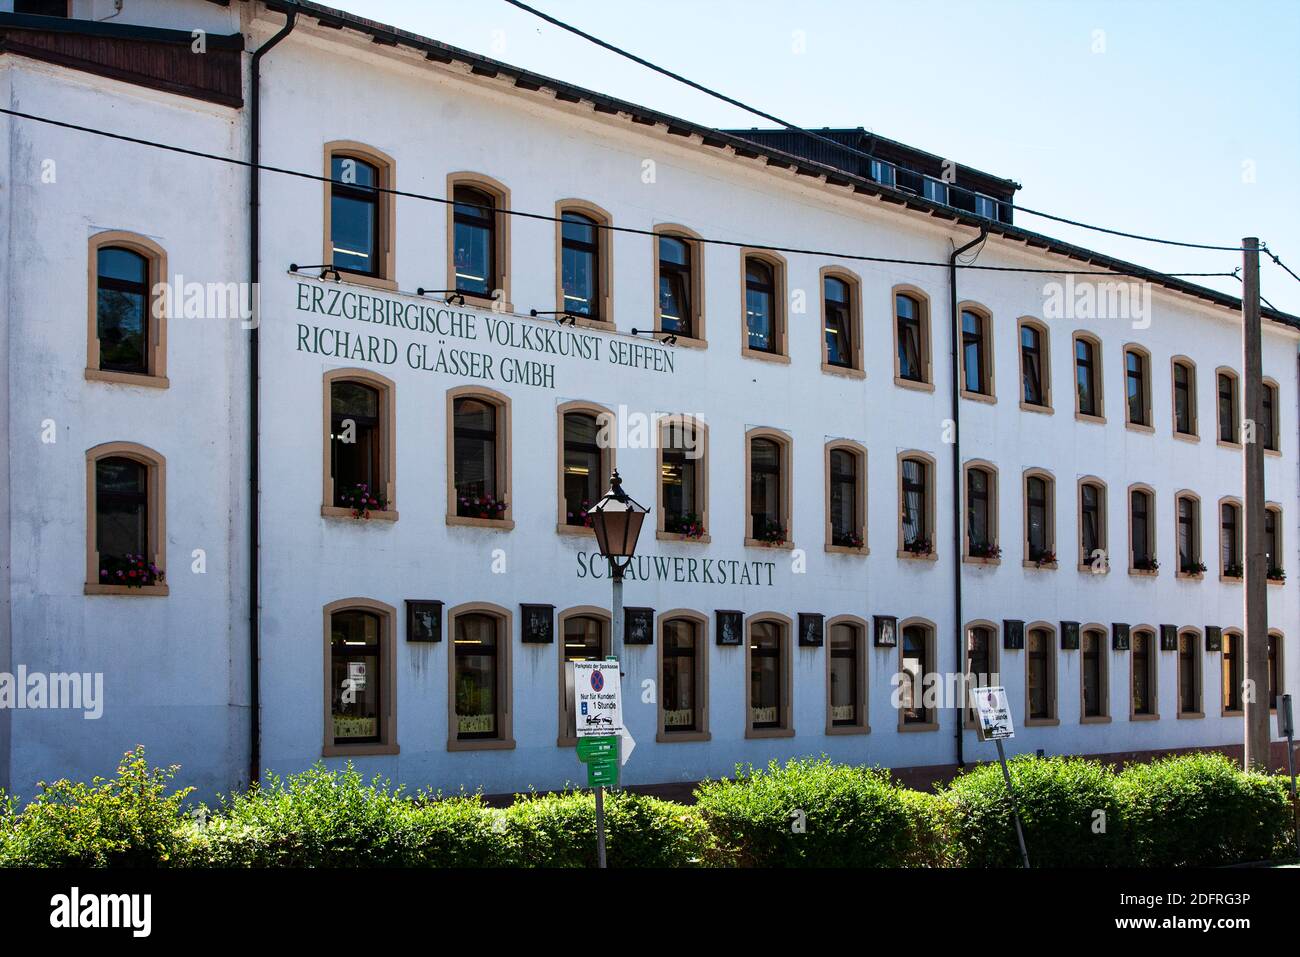 The Erzgebirgische Volkskunst factory, Ore Mountains Folk Art factory, in Seiffen which manufactures and sells traditional Saxon German wooden toys, Stock Photo